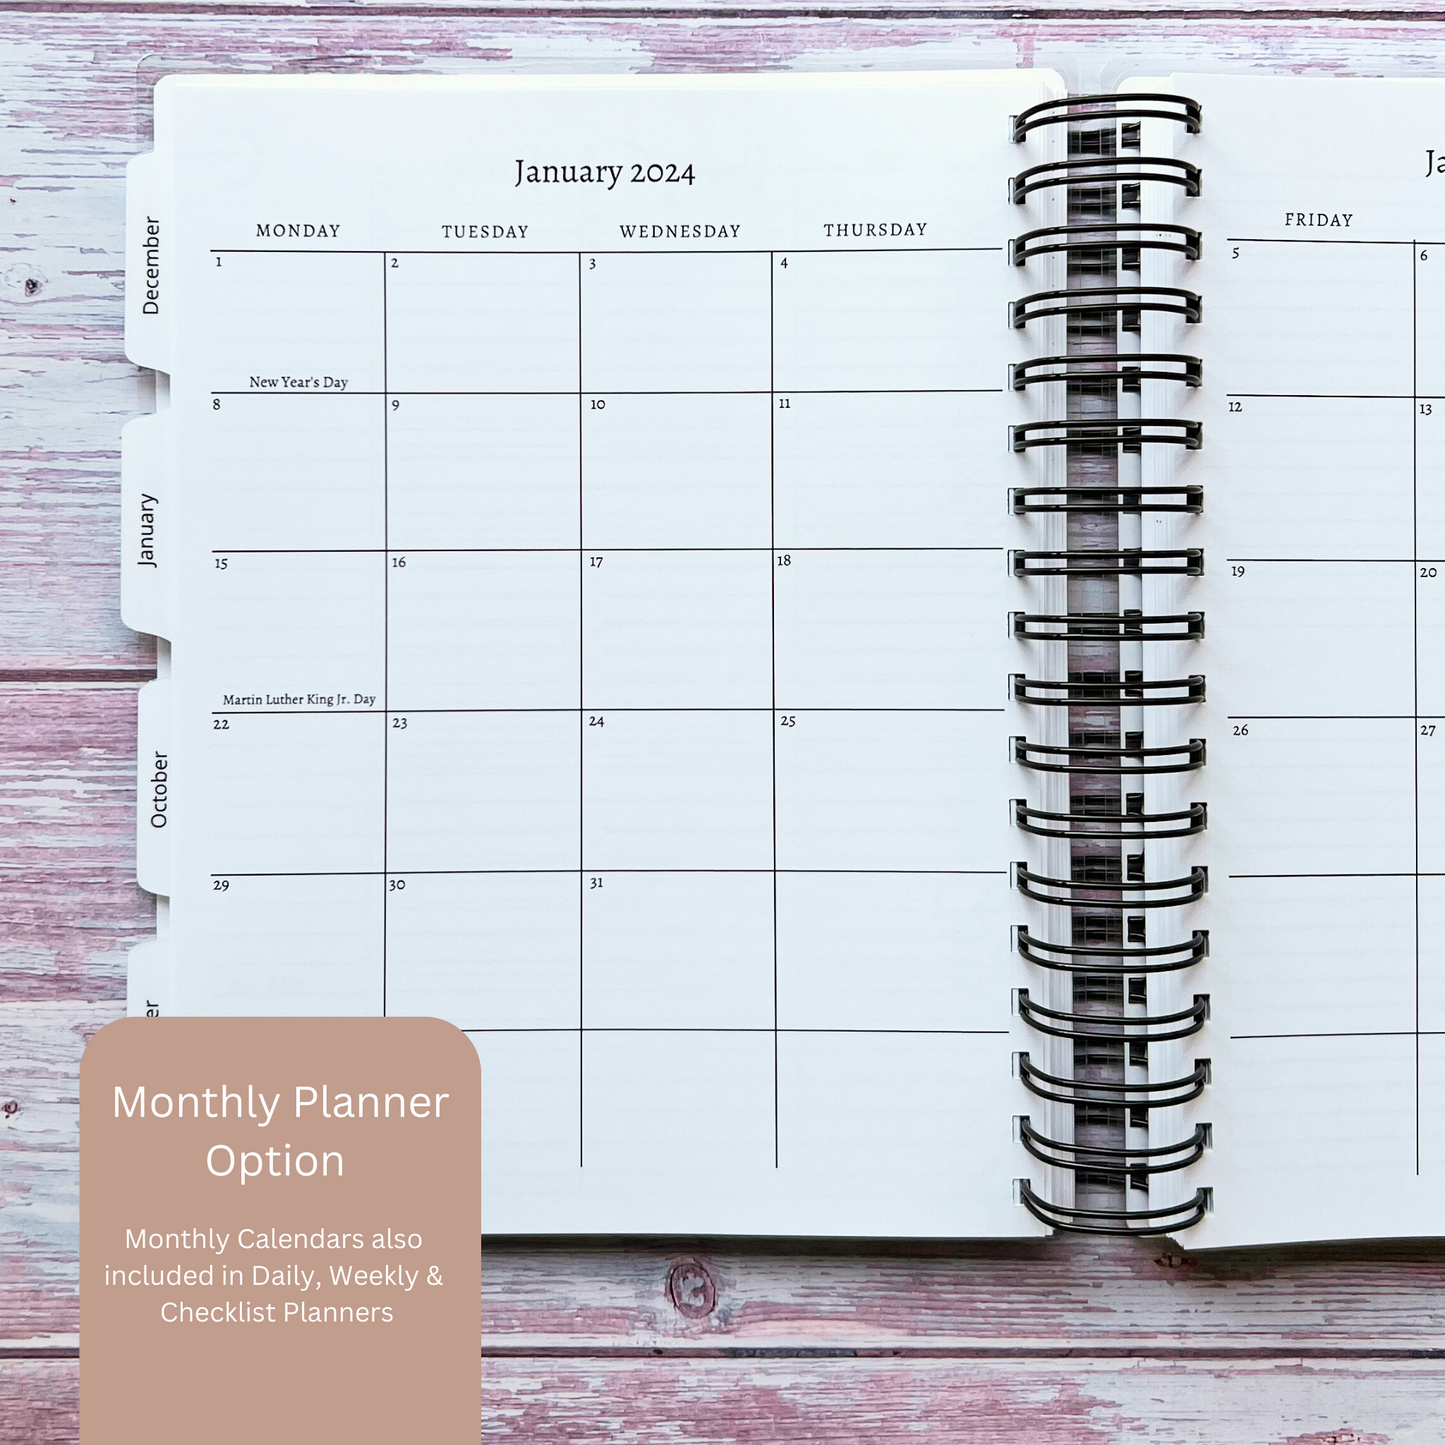 Personalized Monthly Planner - Gothic Roses